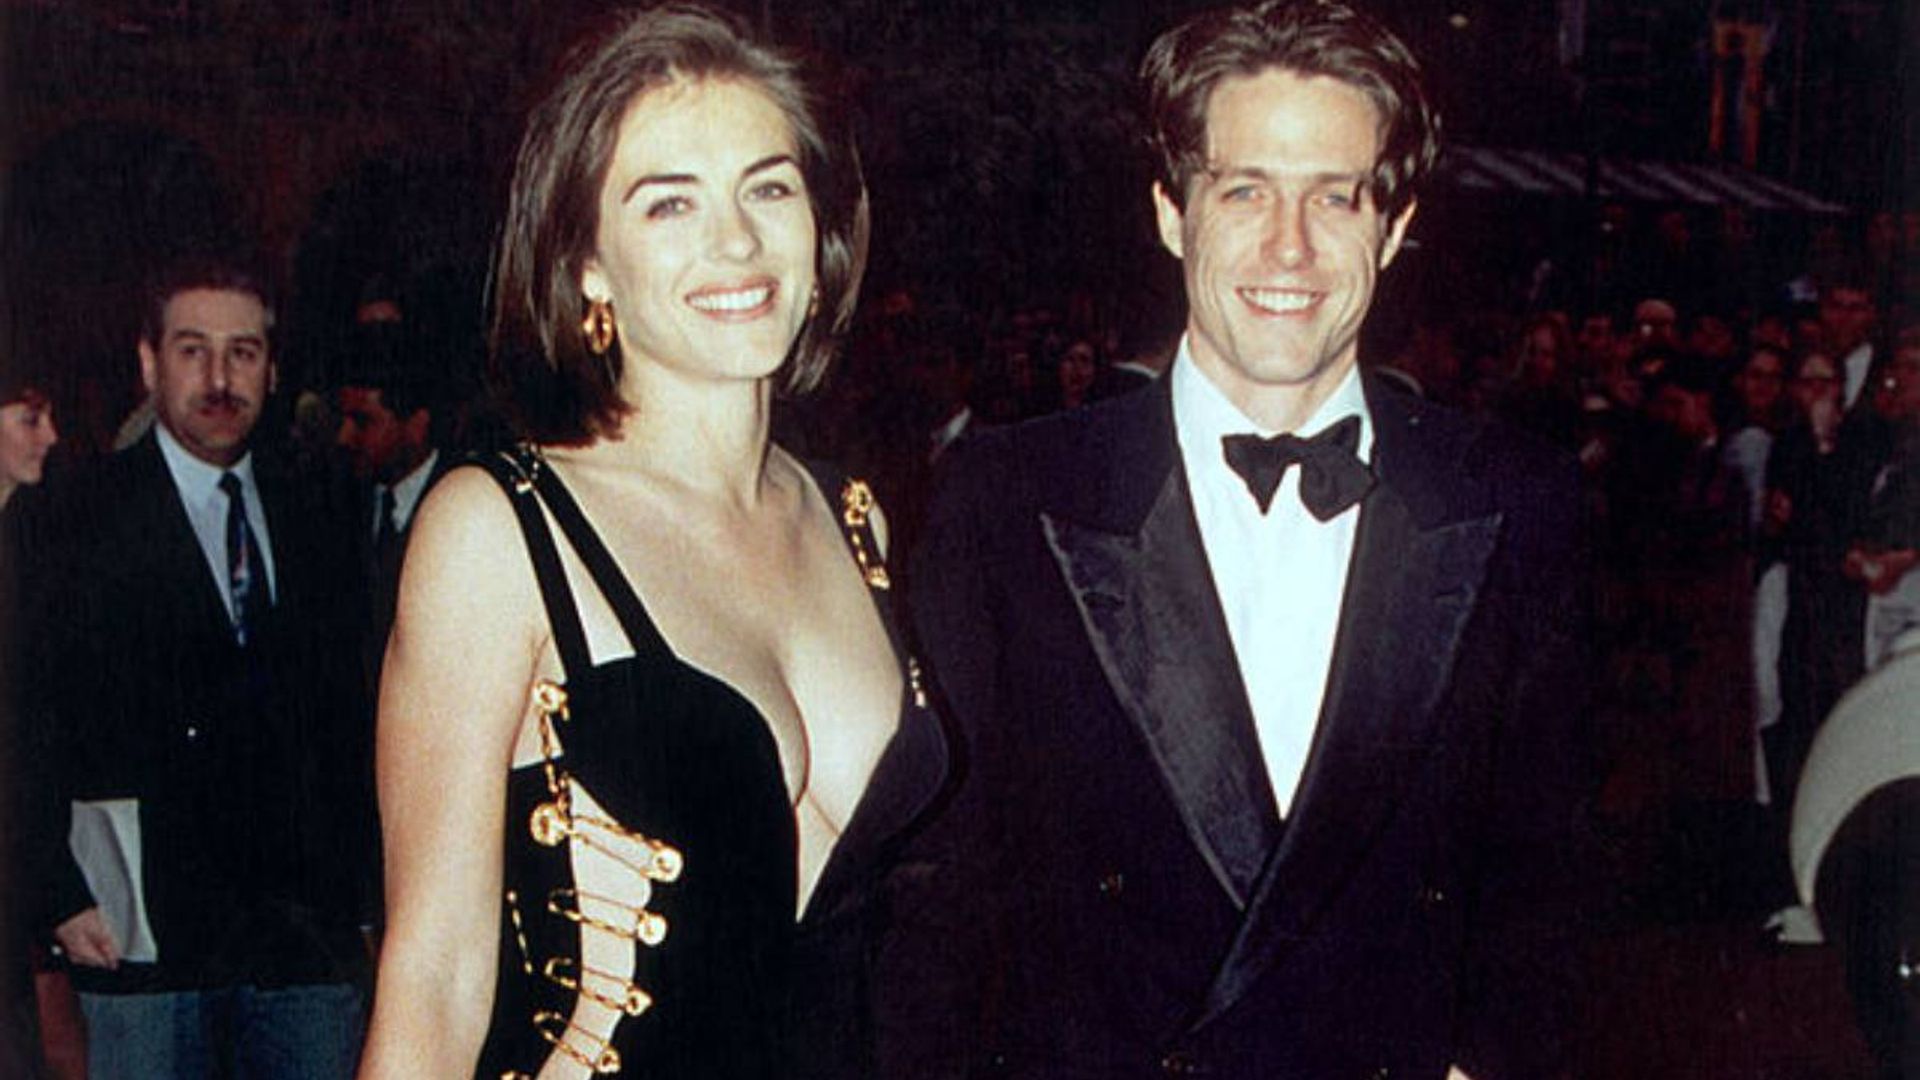 Elizabeth Hurley's iconic Versace dress makes a comeback - and you won't believe who wore it